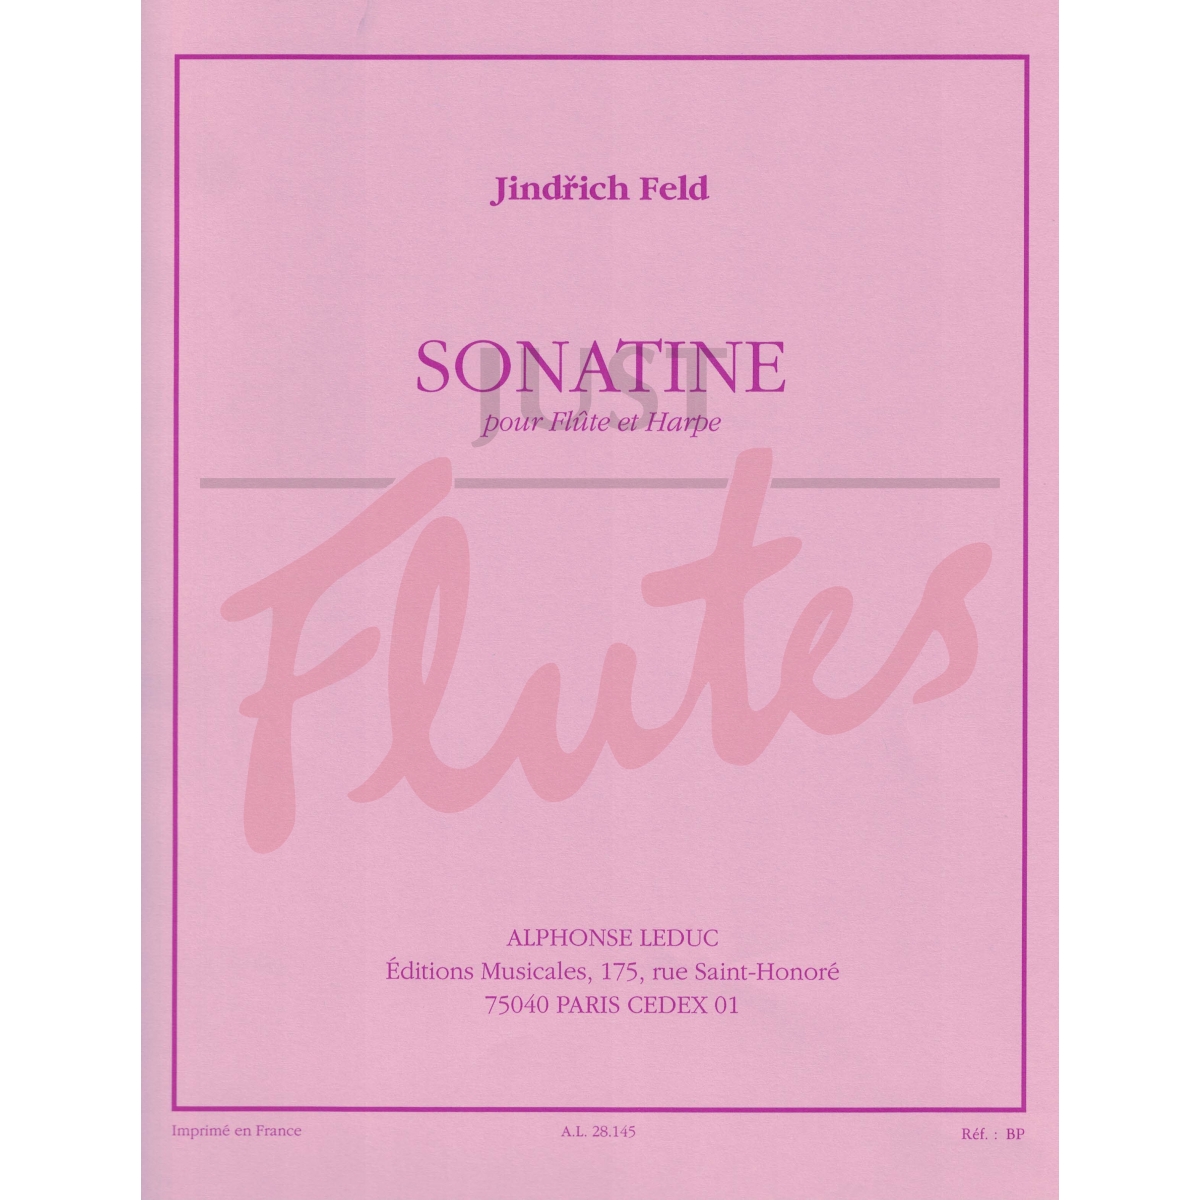 Sonatine for Flute and Harp